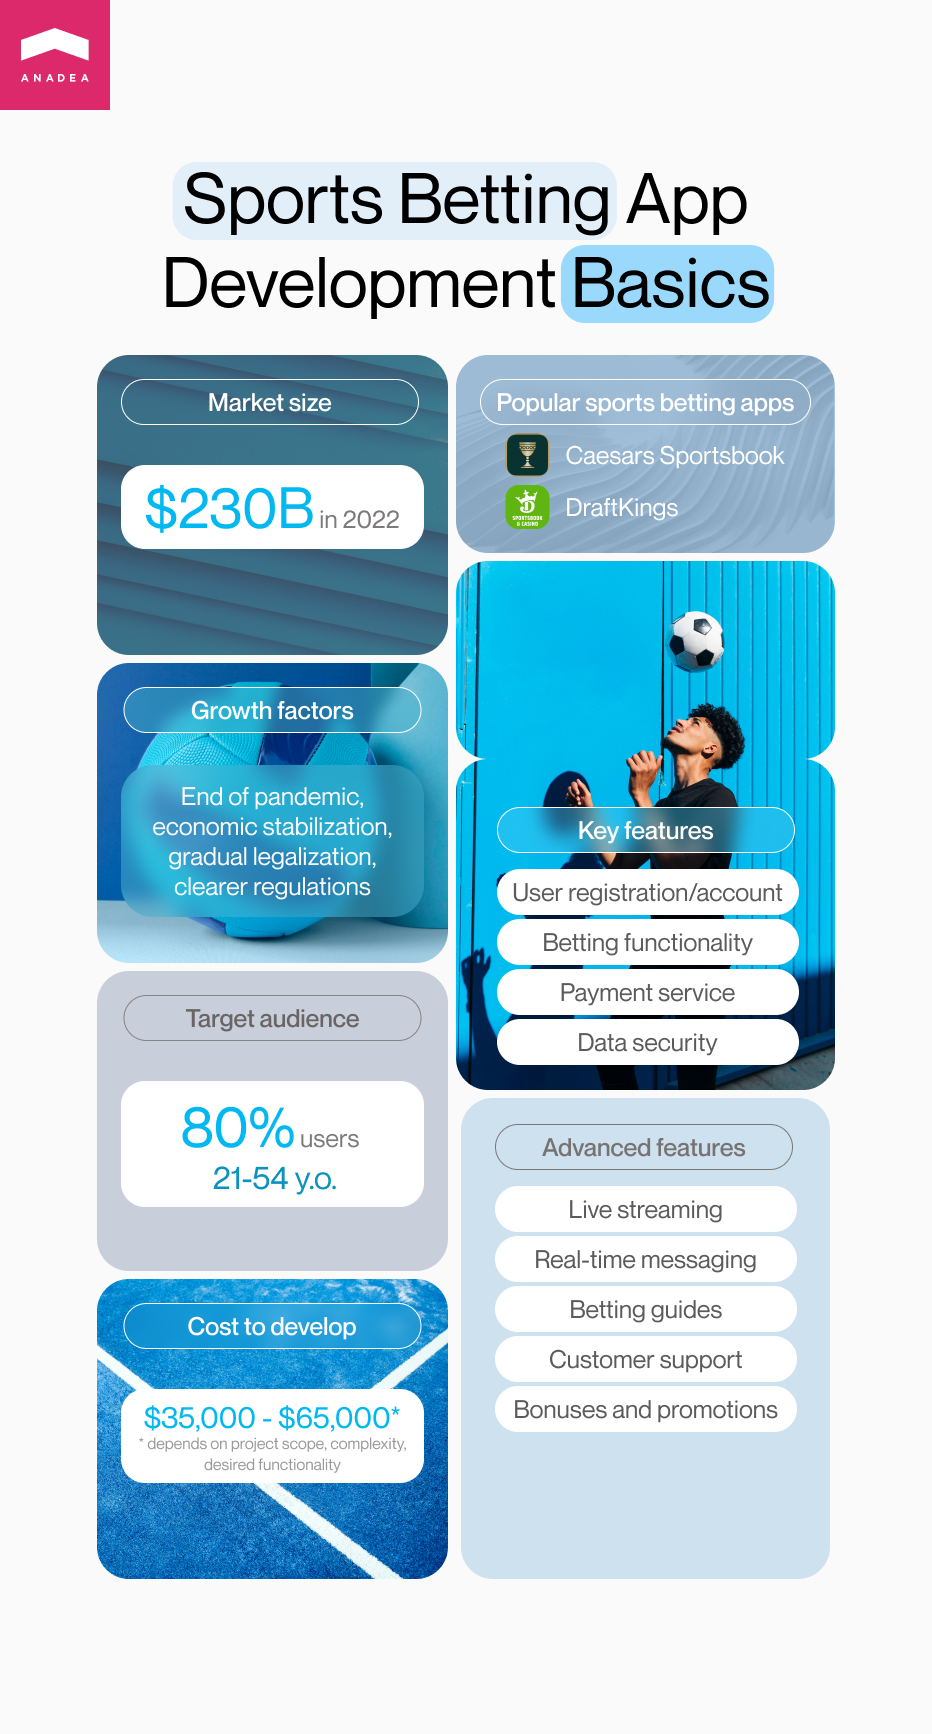 Sports betting mobile app infographic - Market size, features, cost